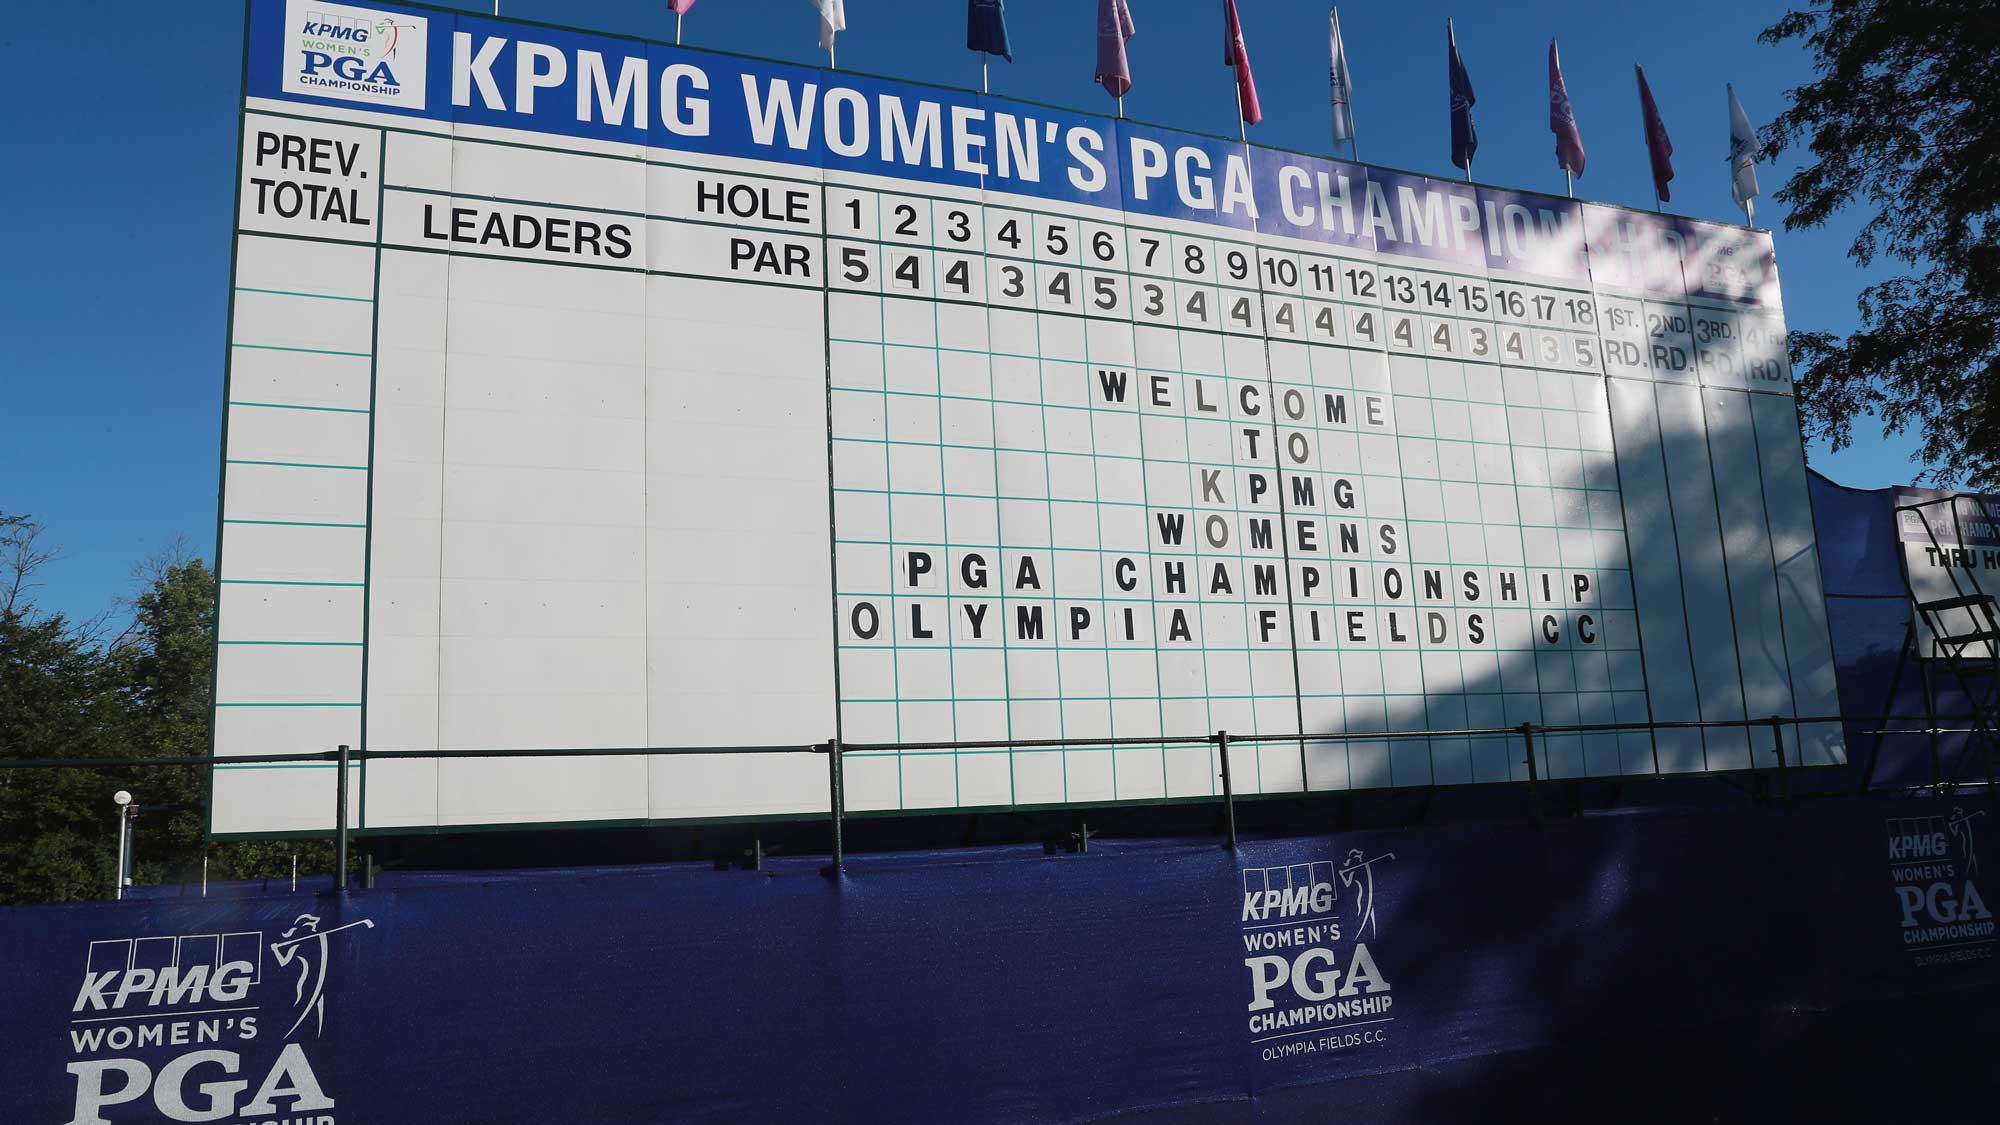 A message is displayed on the main leaderboard on the 18th hole during the pro-am prior to the start of the 2017 KPMG Women's PGA Championship